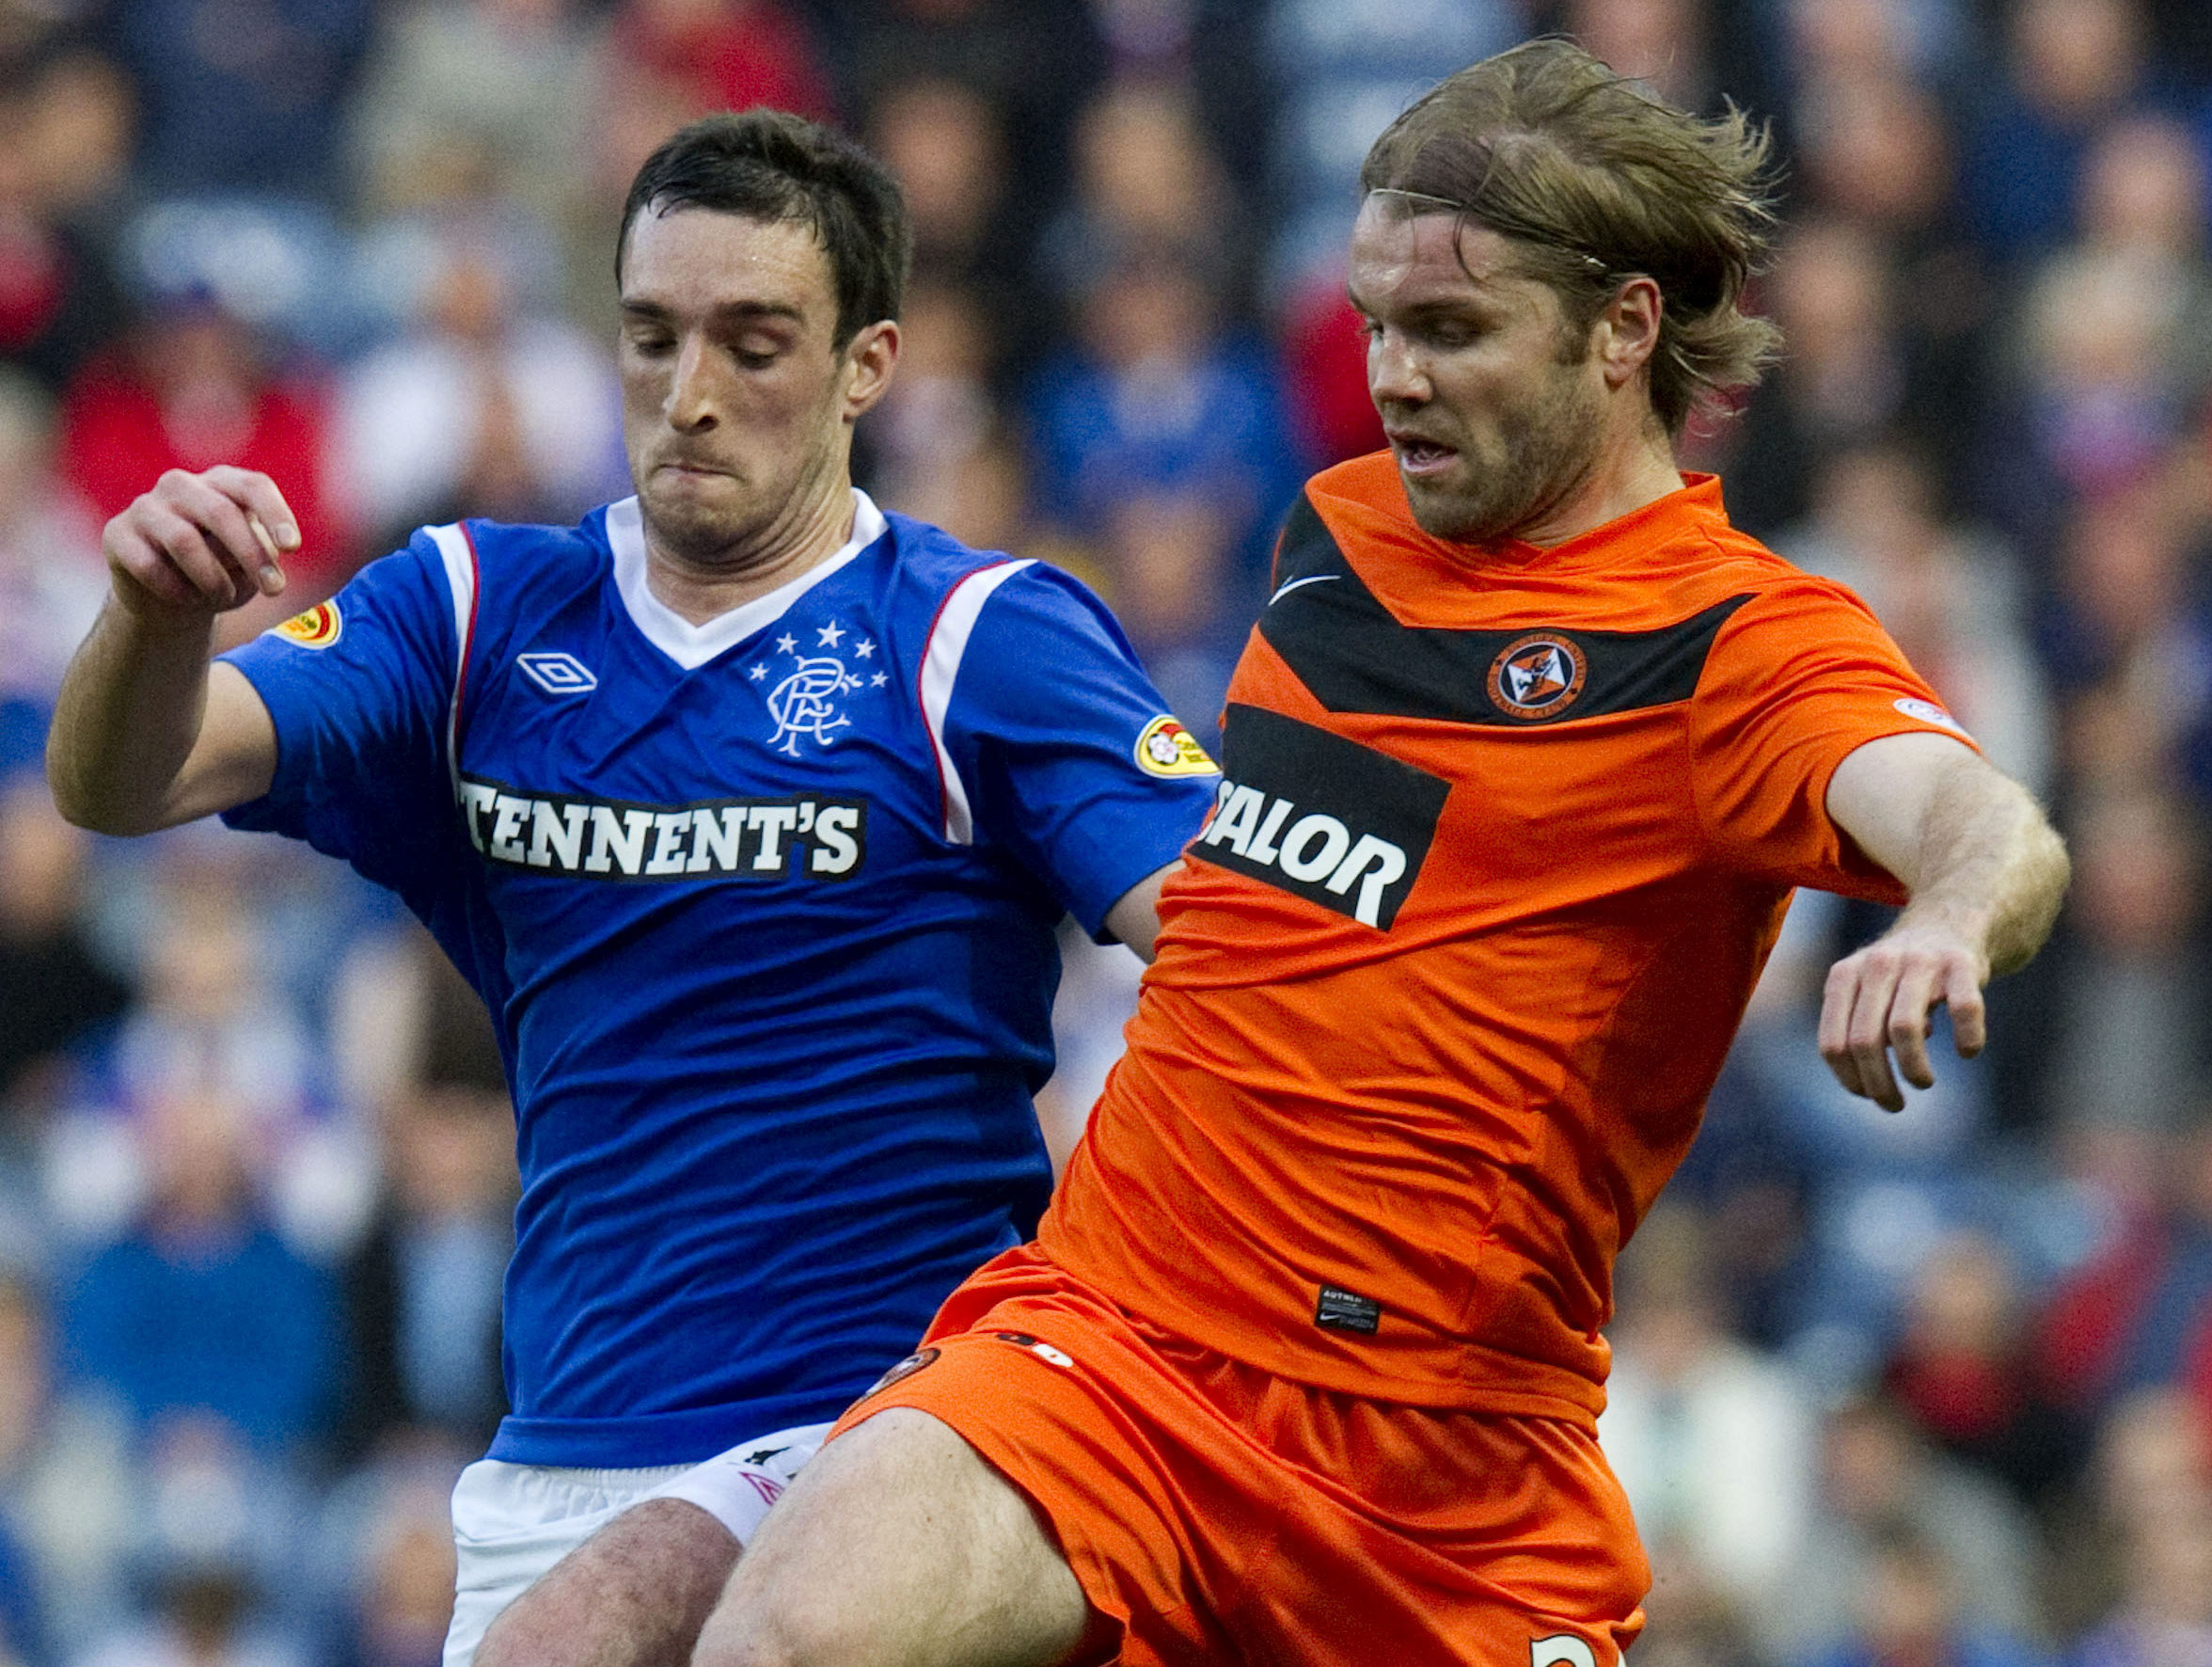 Lee Wallace and Robbie Neilson in opposition.